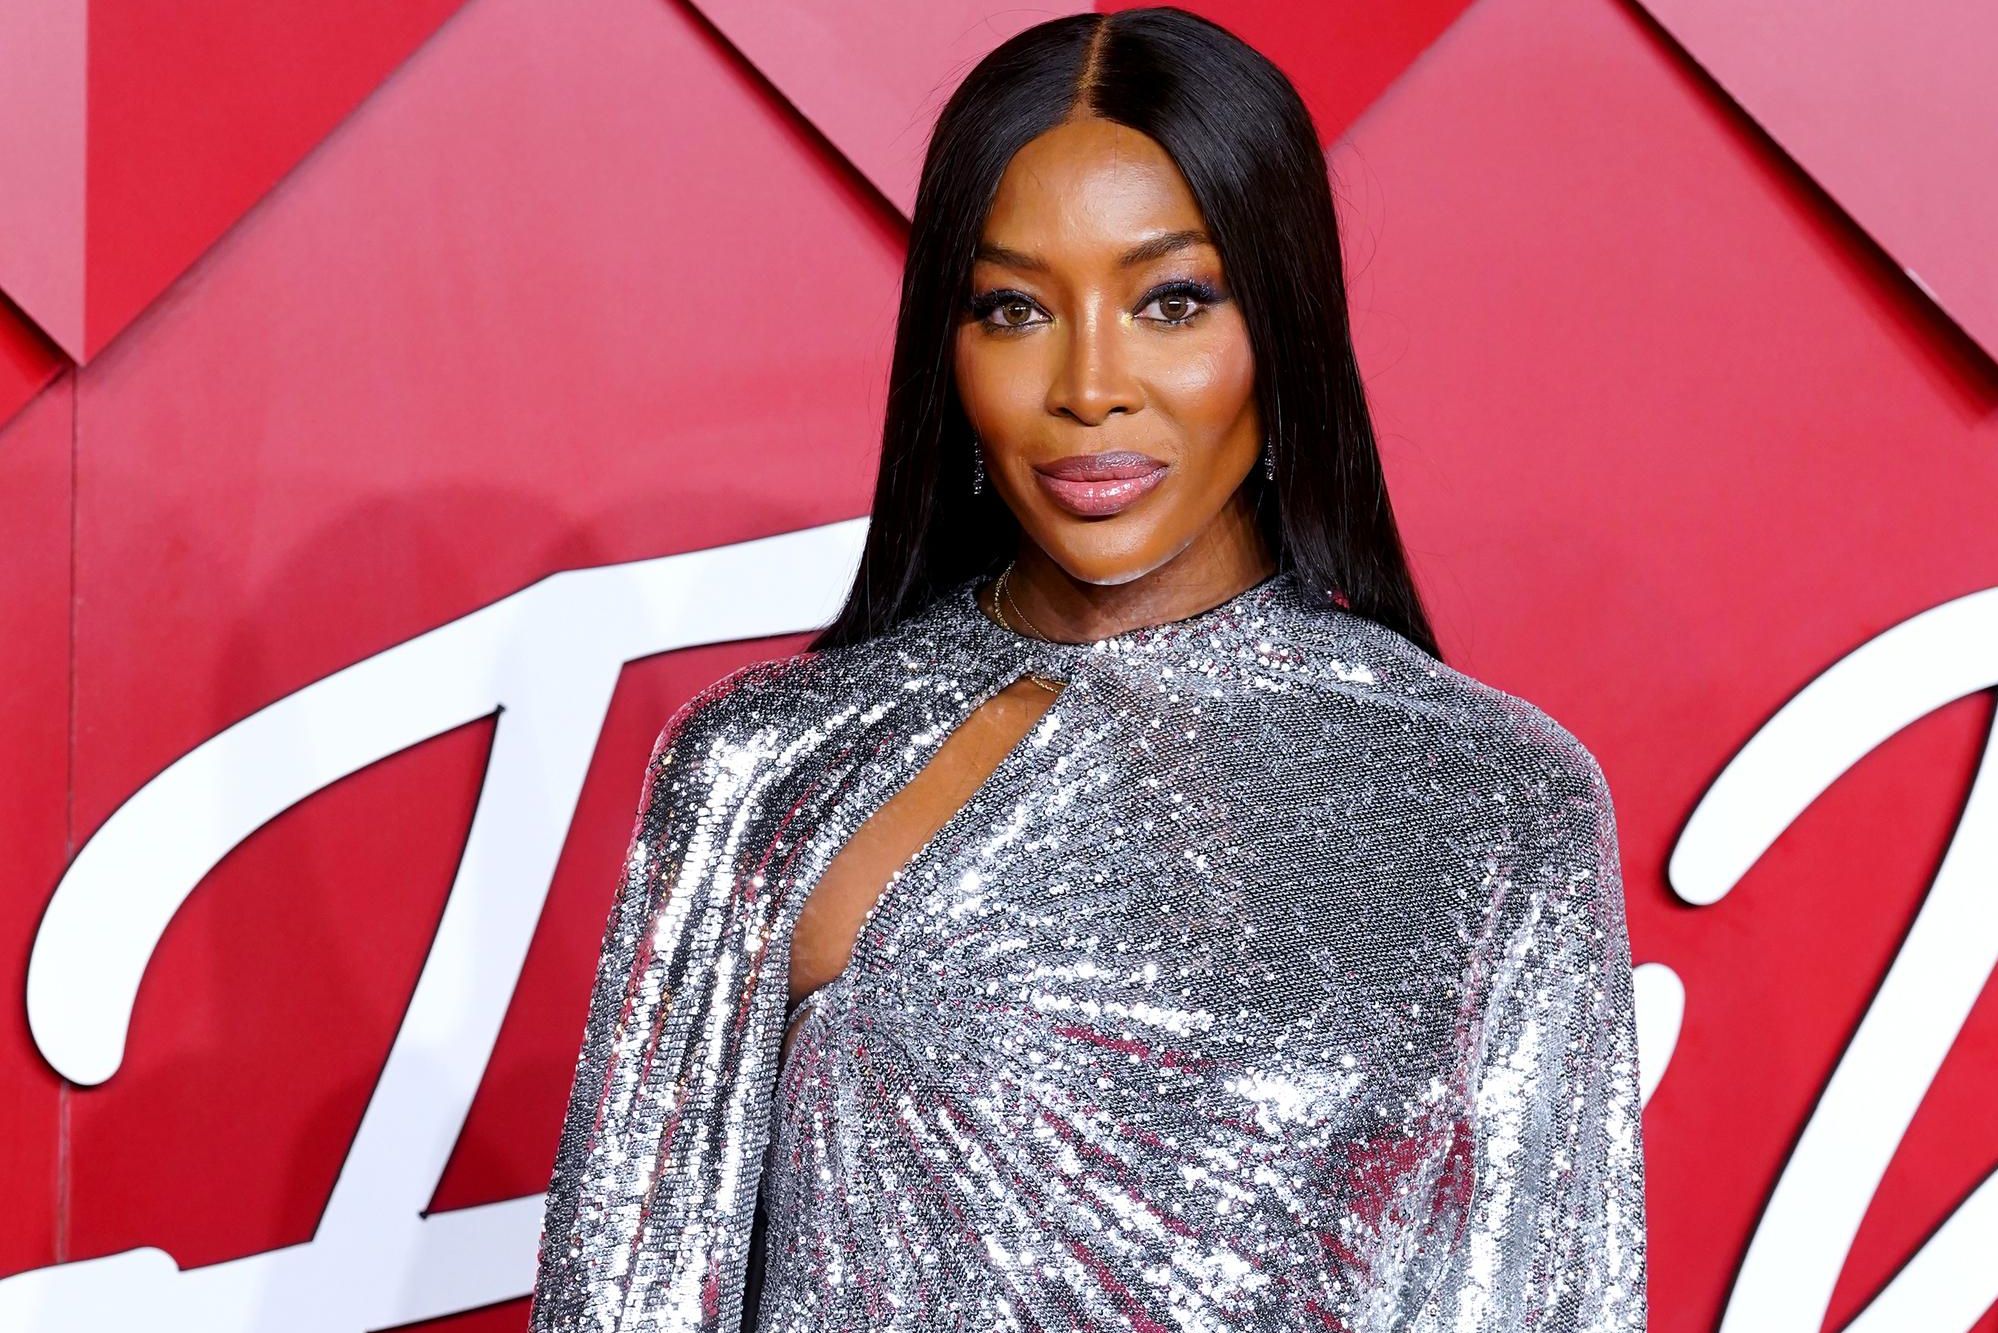 Naomi Campbell says backlash over her PrettyLittleThing collab is